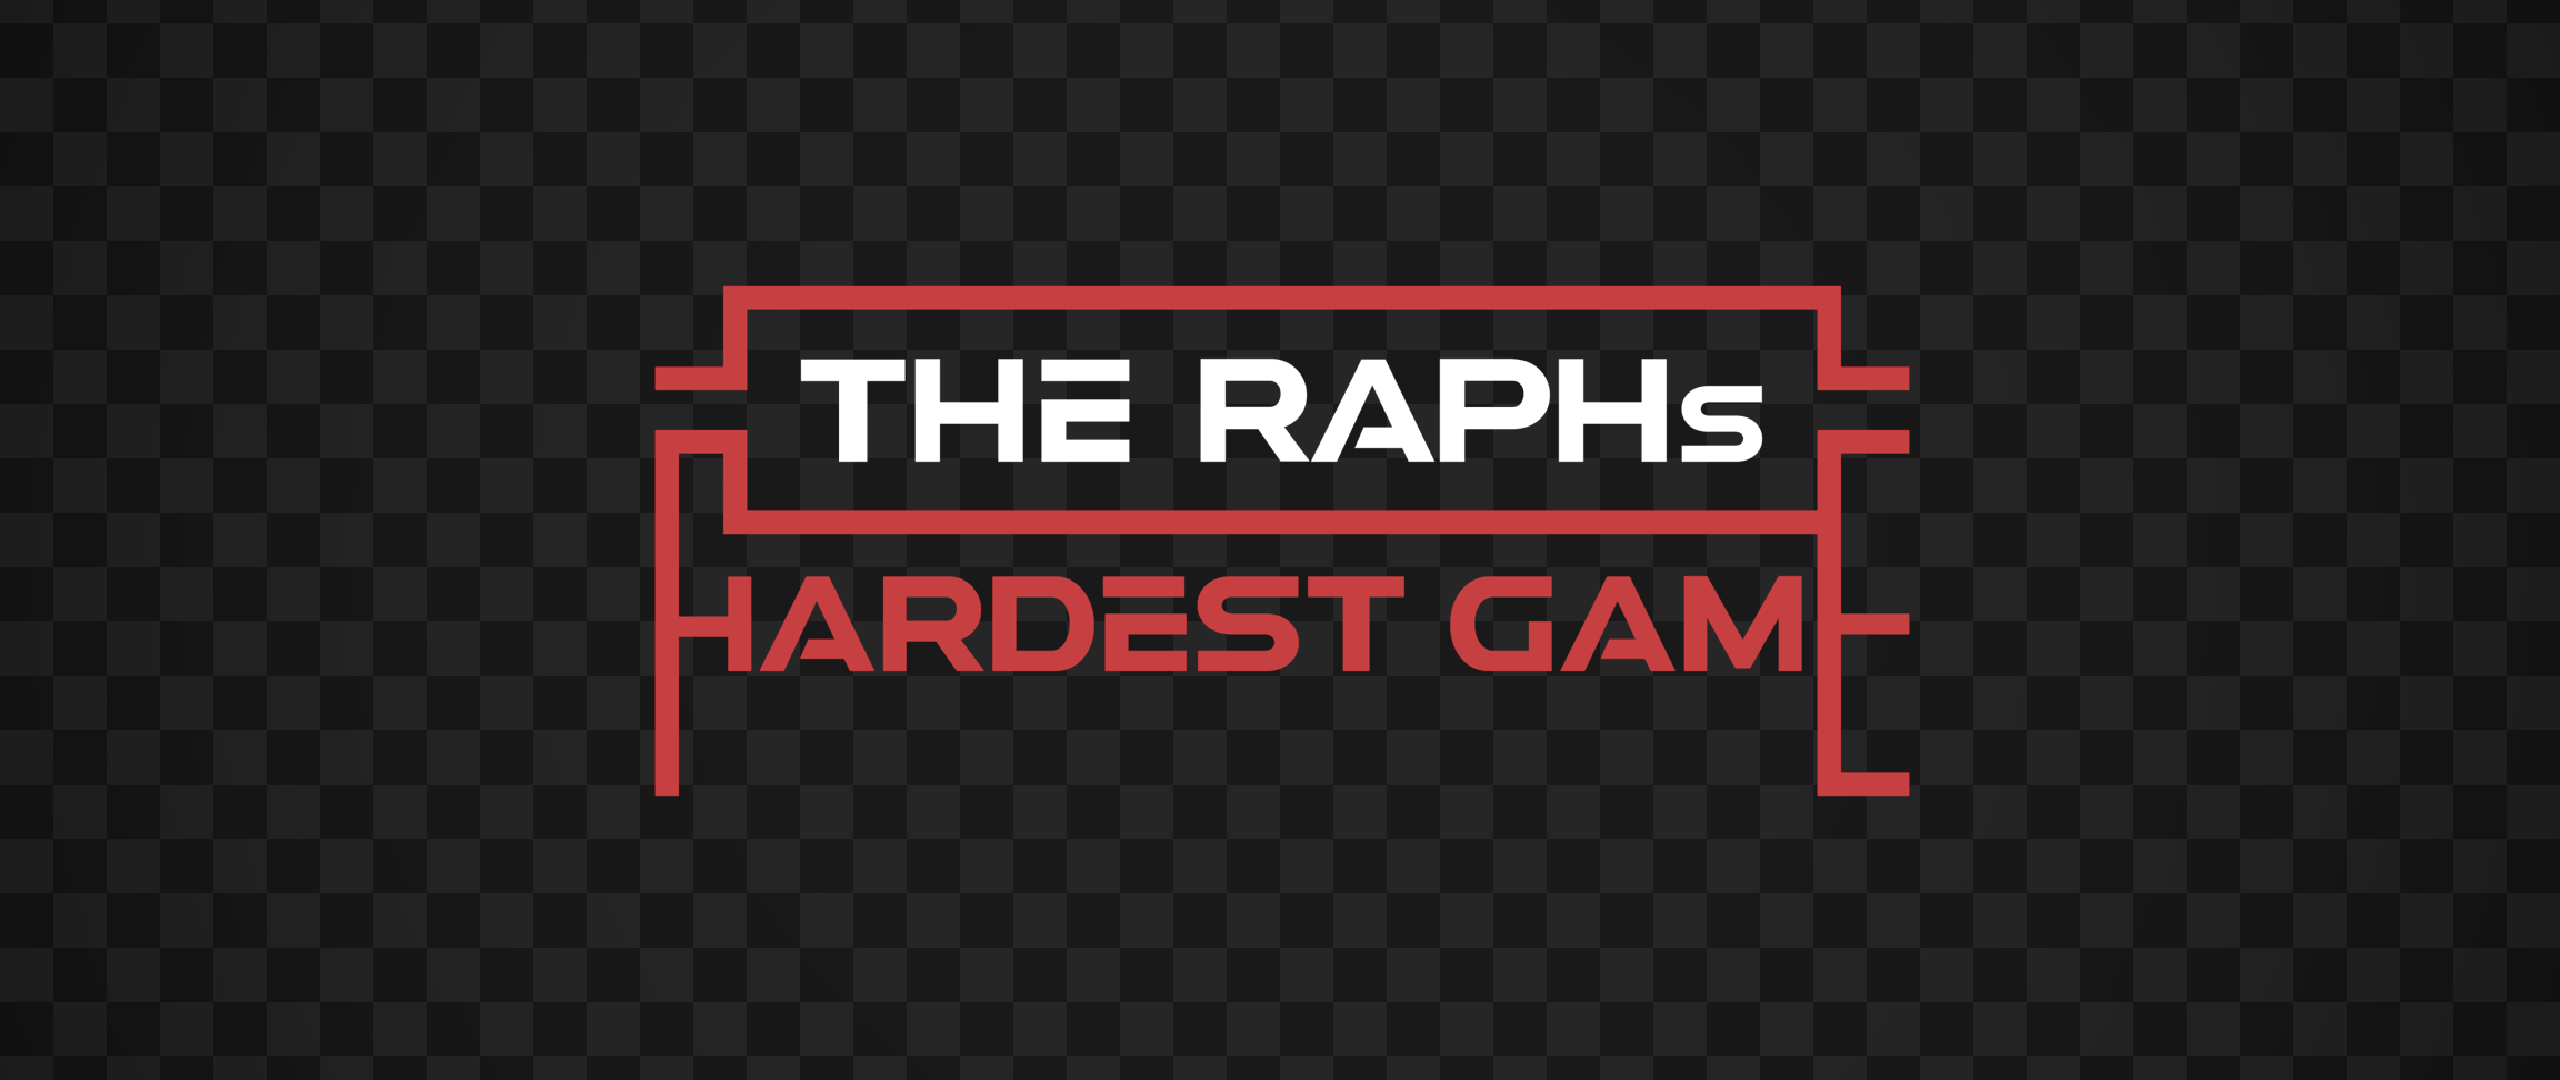 The Raph's Hardest Game